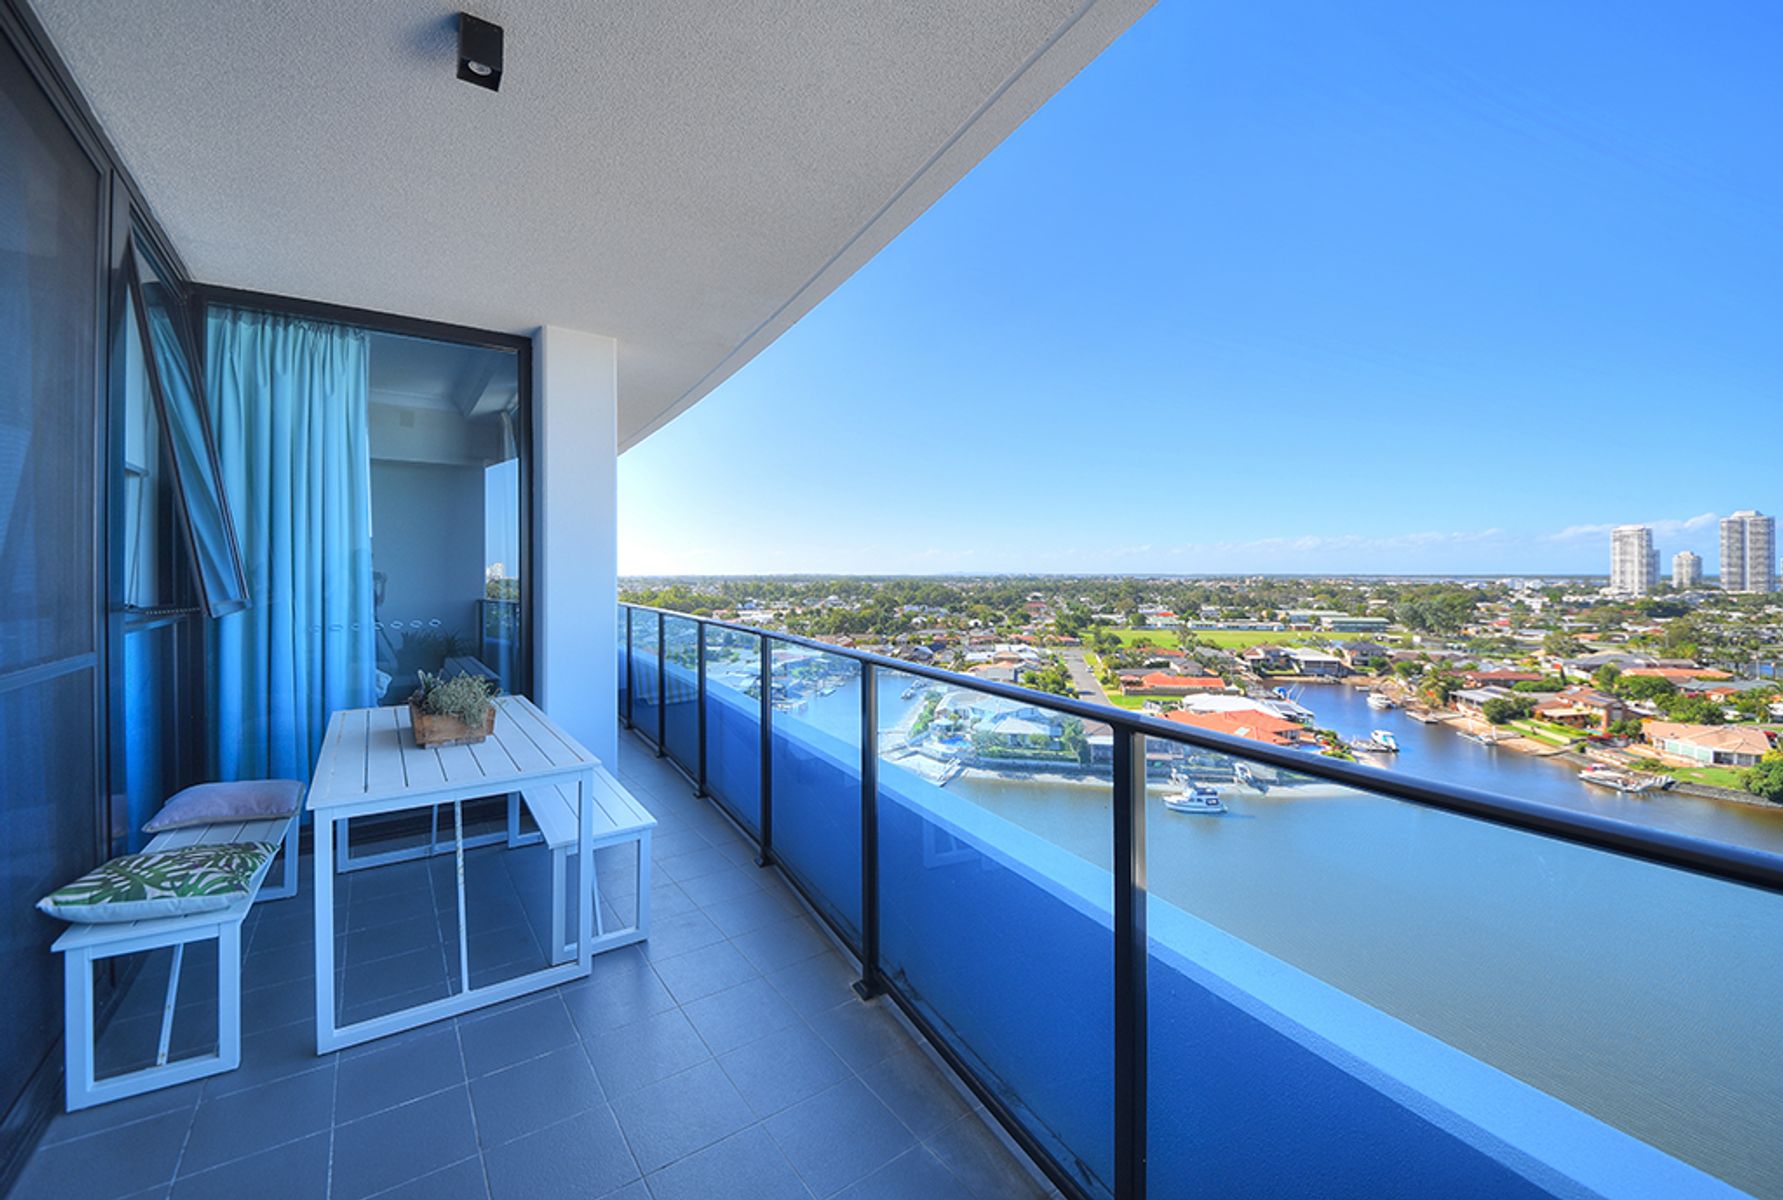 21004 5 Harbour side court Biggera Waters Anna Tang 02 Best Agent